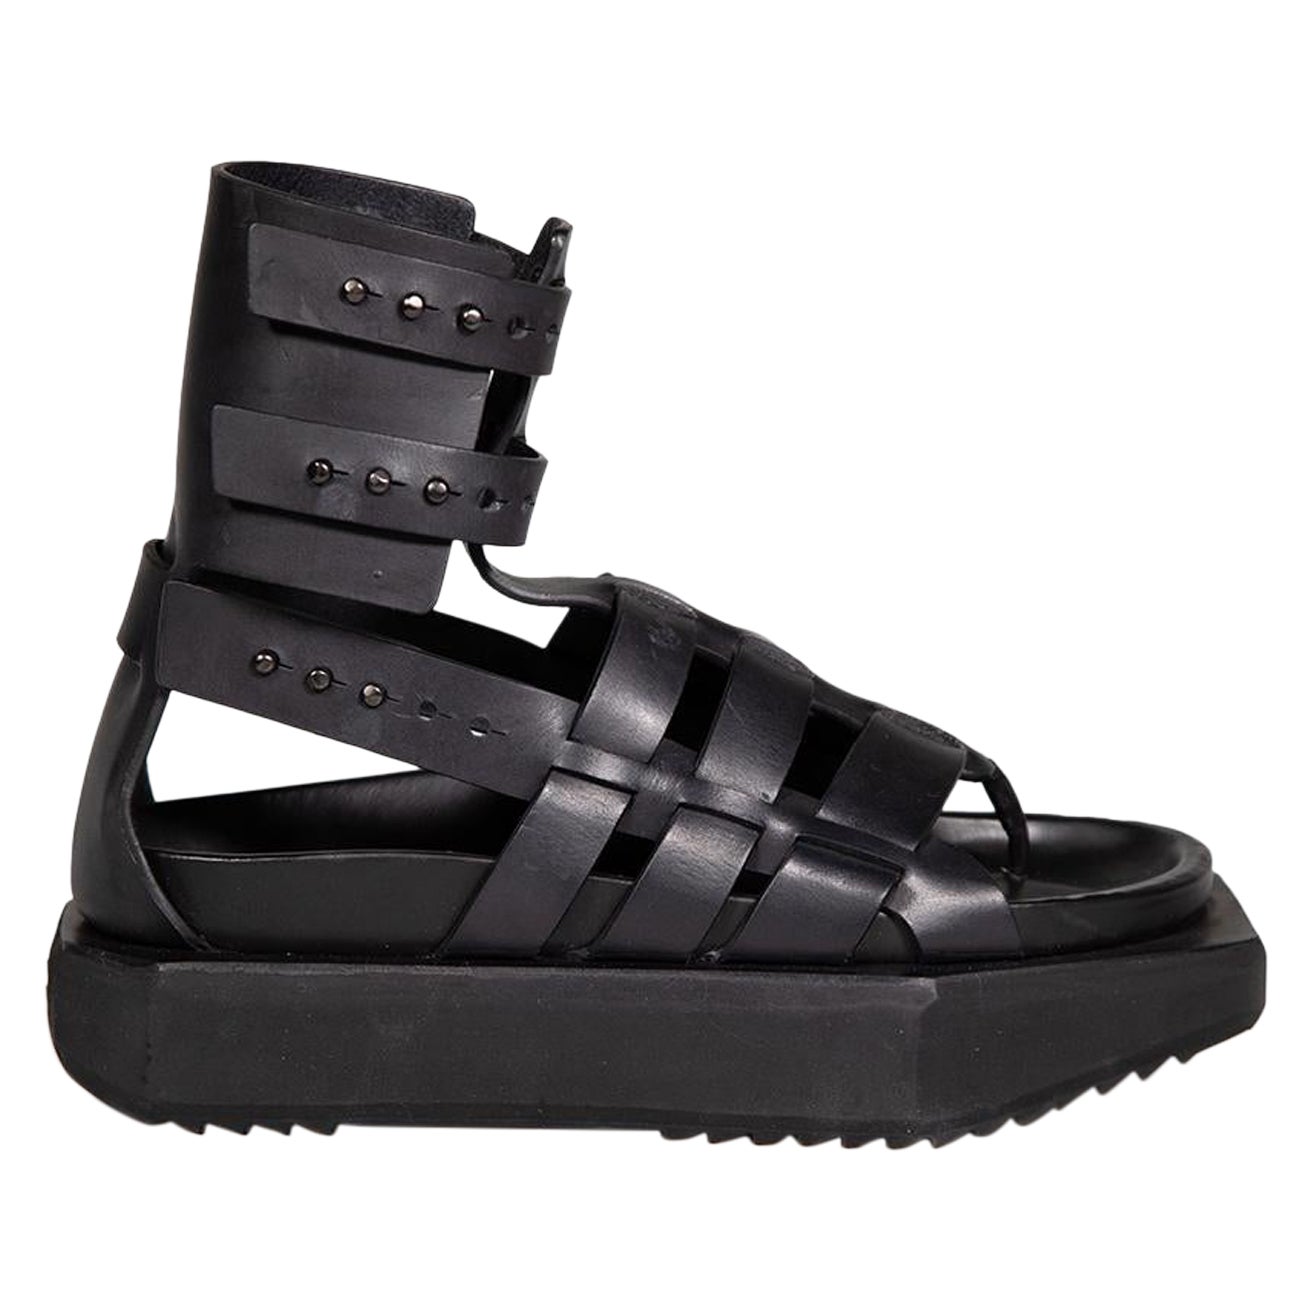 Rick Owens 2016 S/S Black Leather Turbo Cyclop Sandals Size IT 39